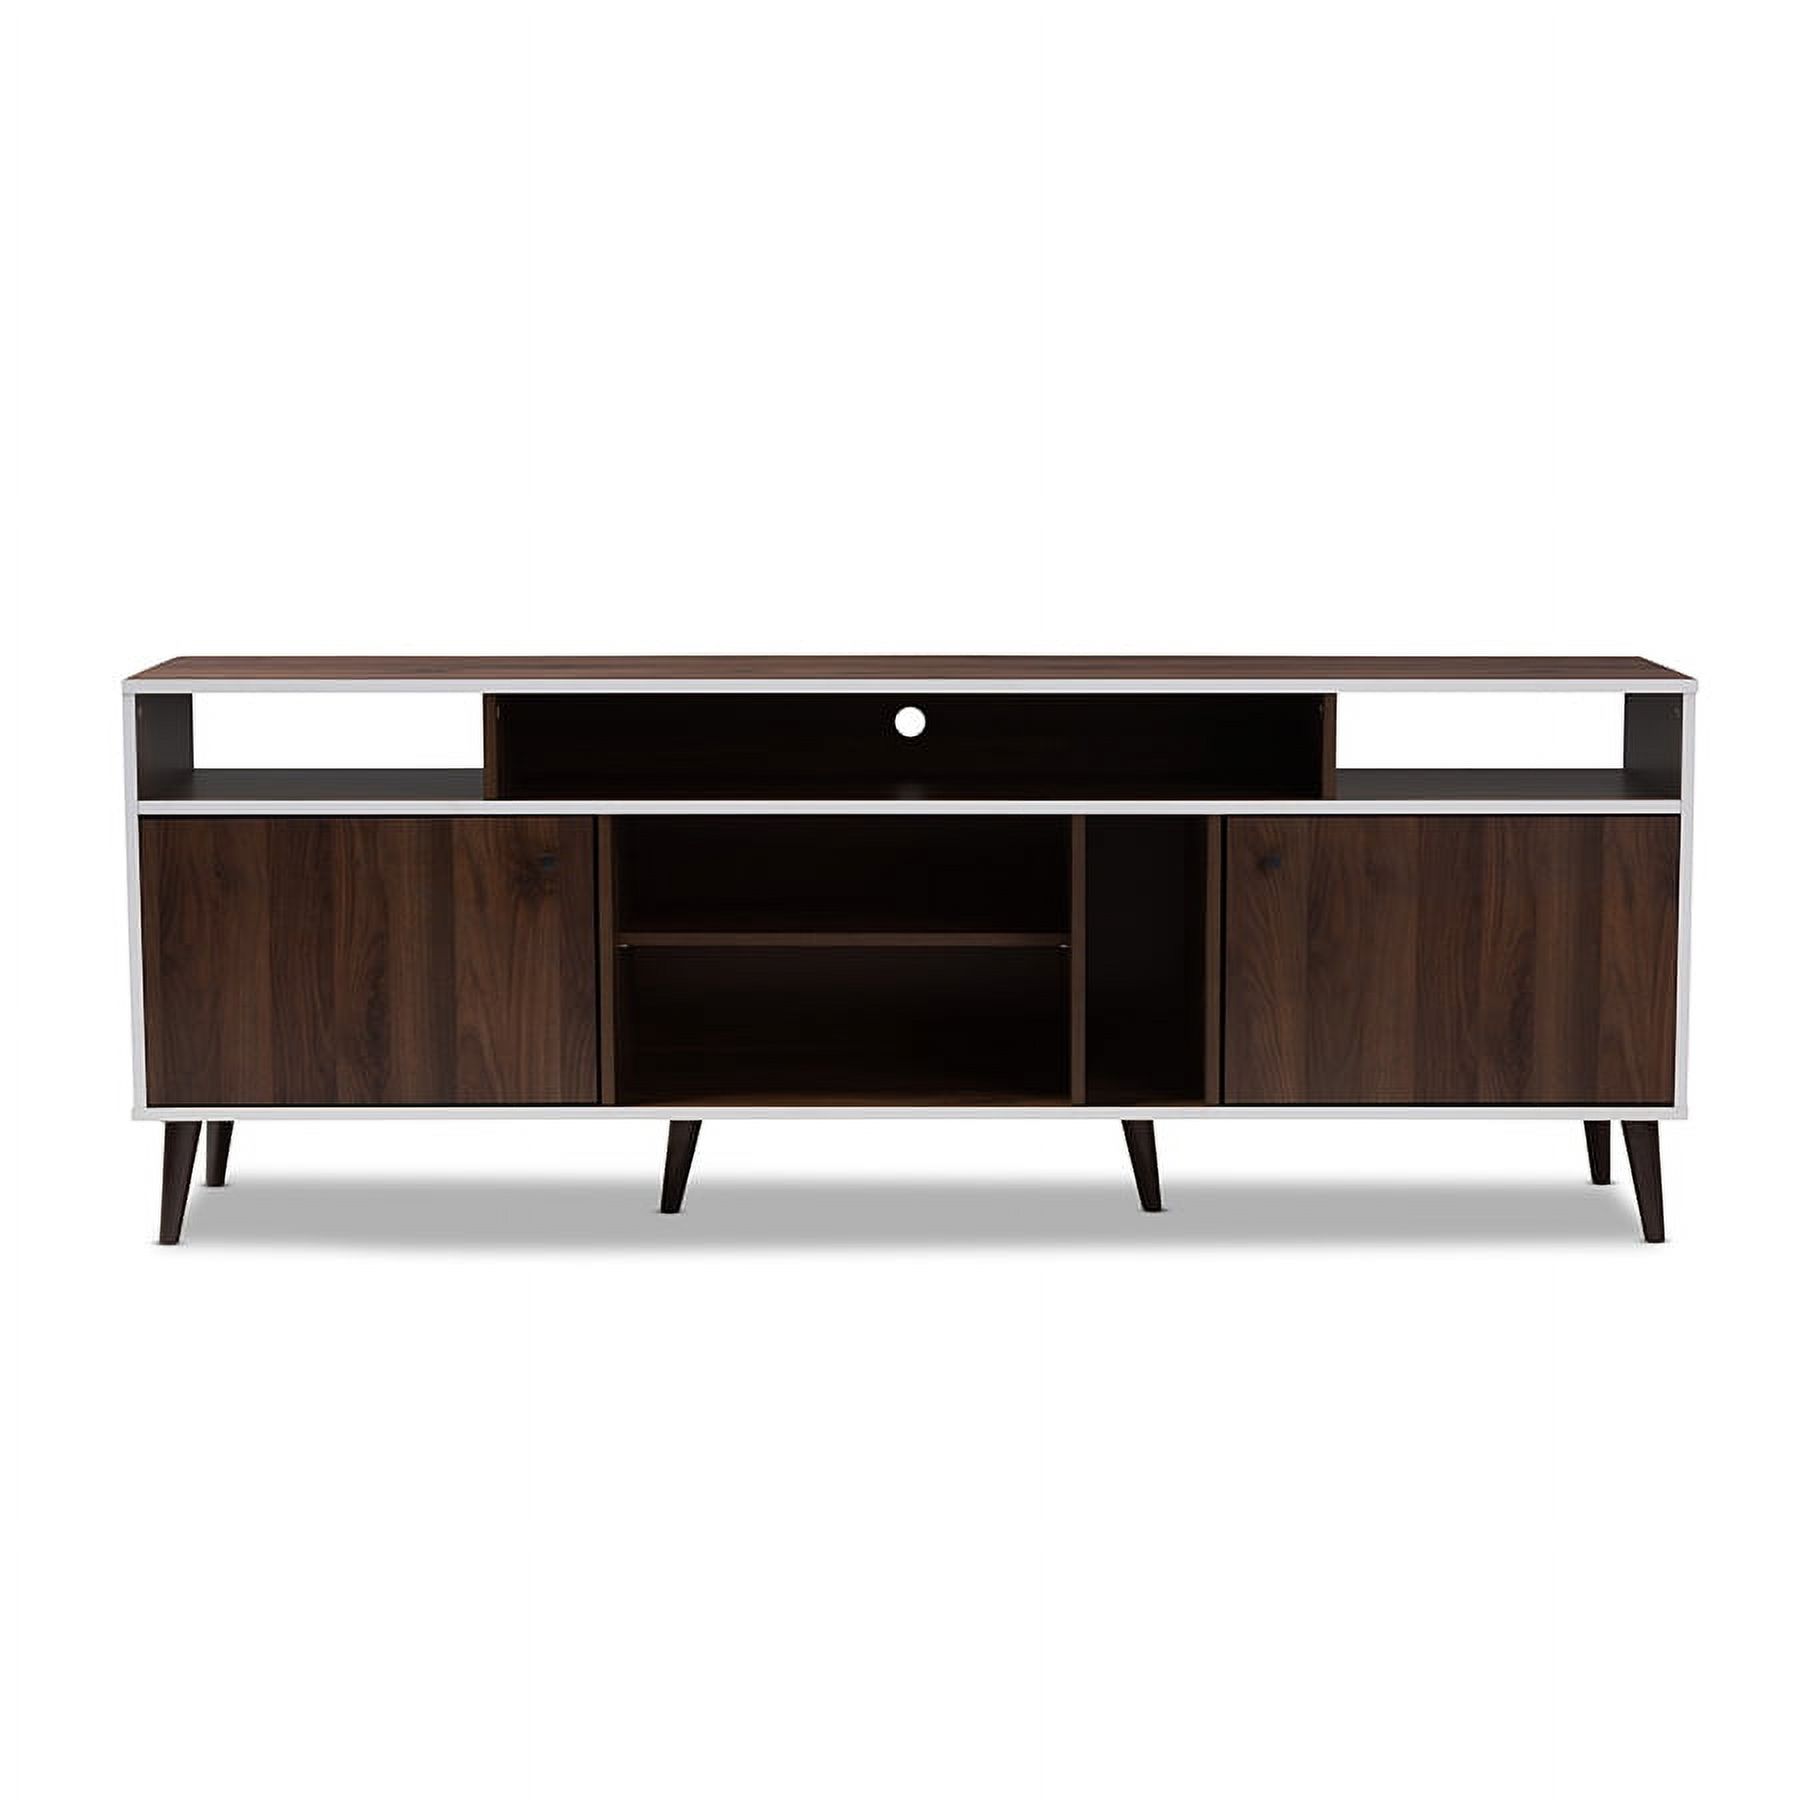 Baxton Studio Marion Mid-Century Modern Brown and White Finished TV Stand - image 4 of 7